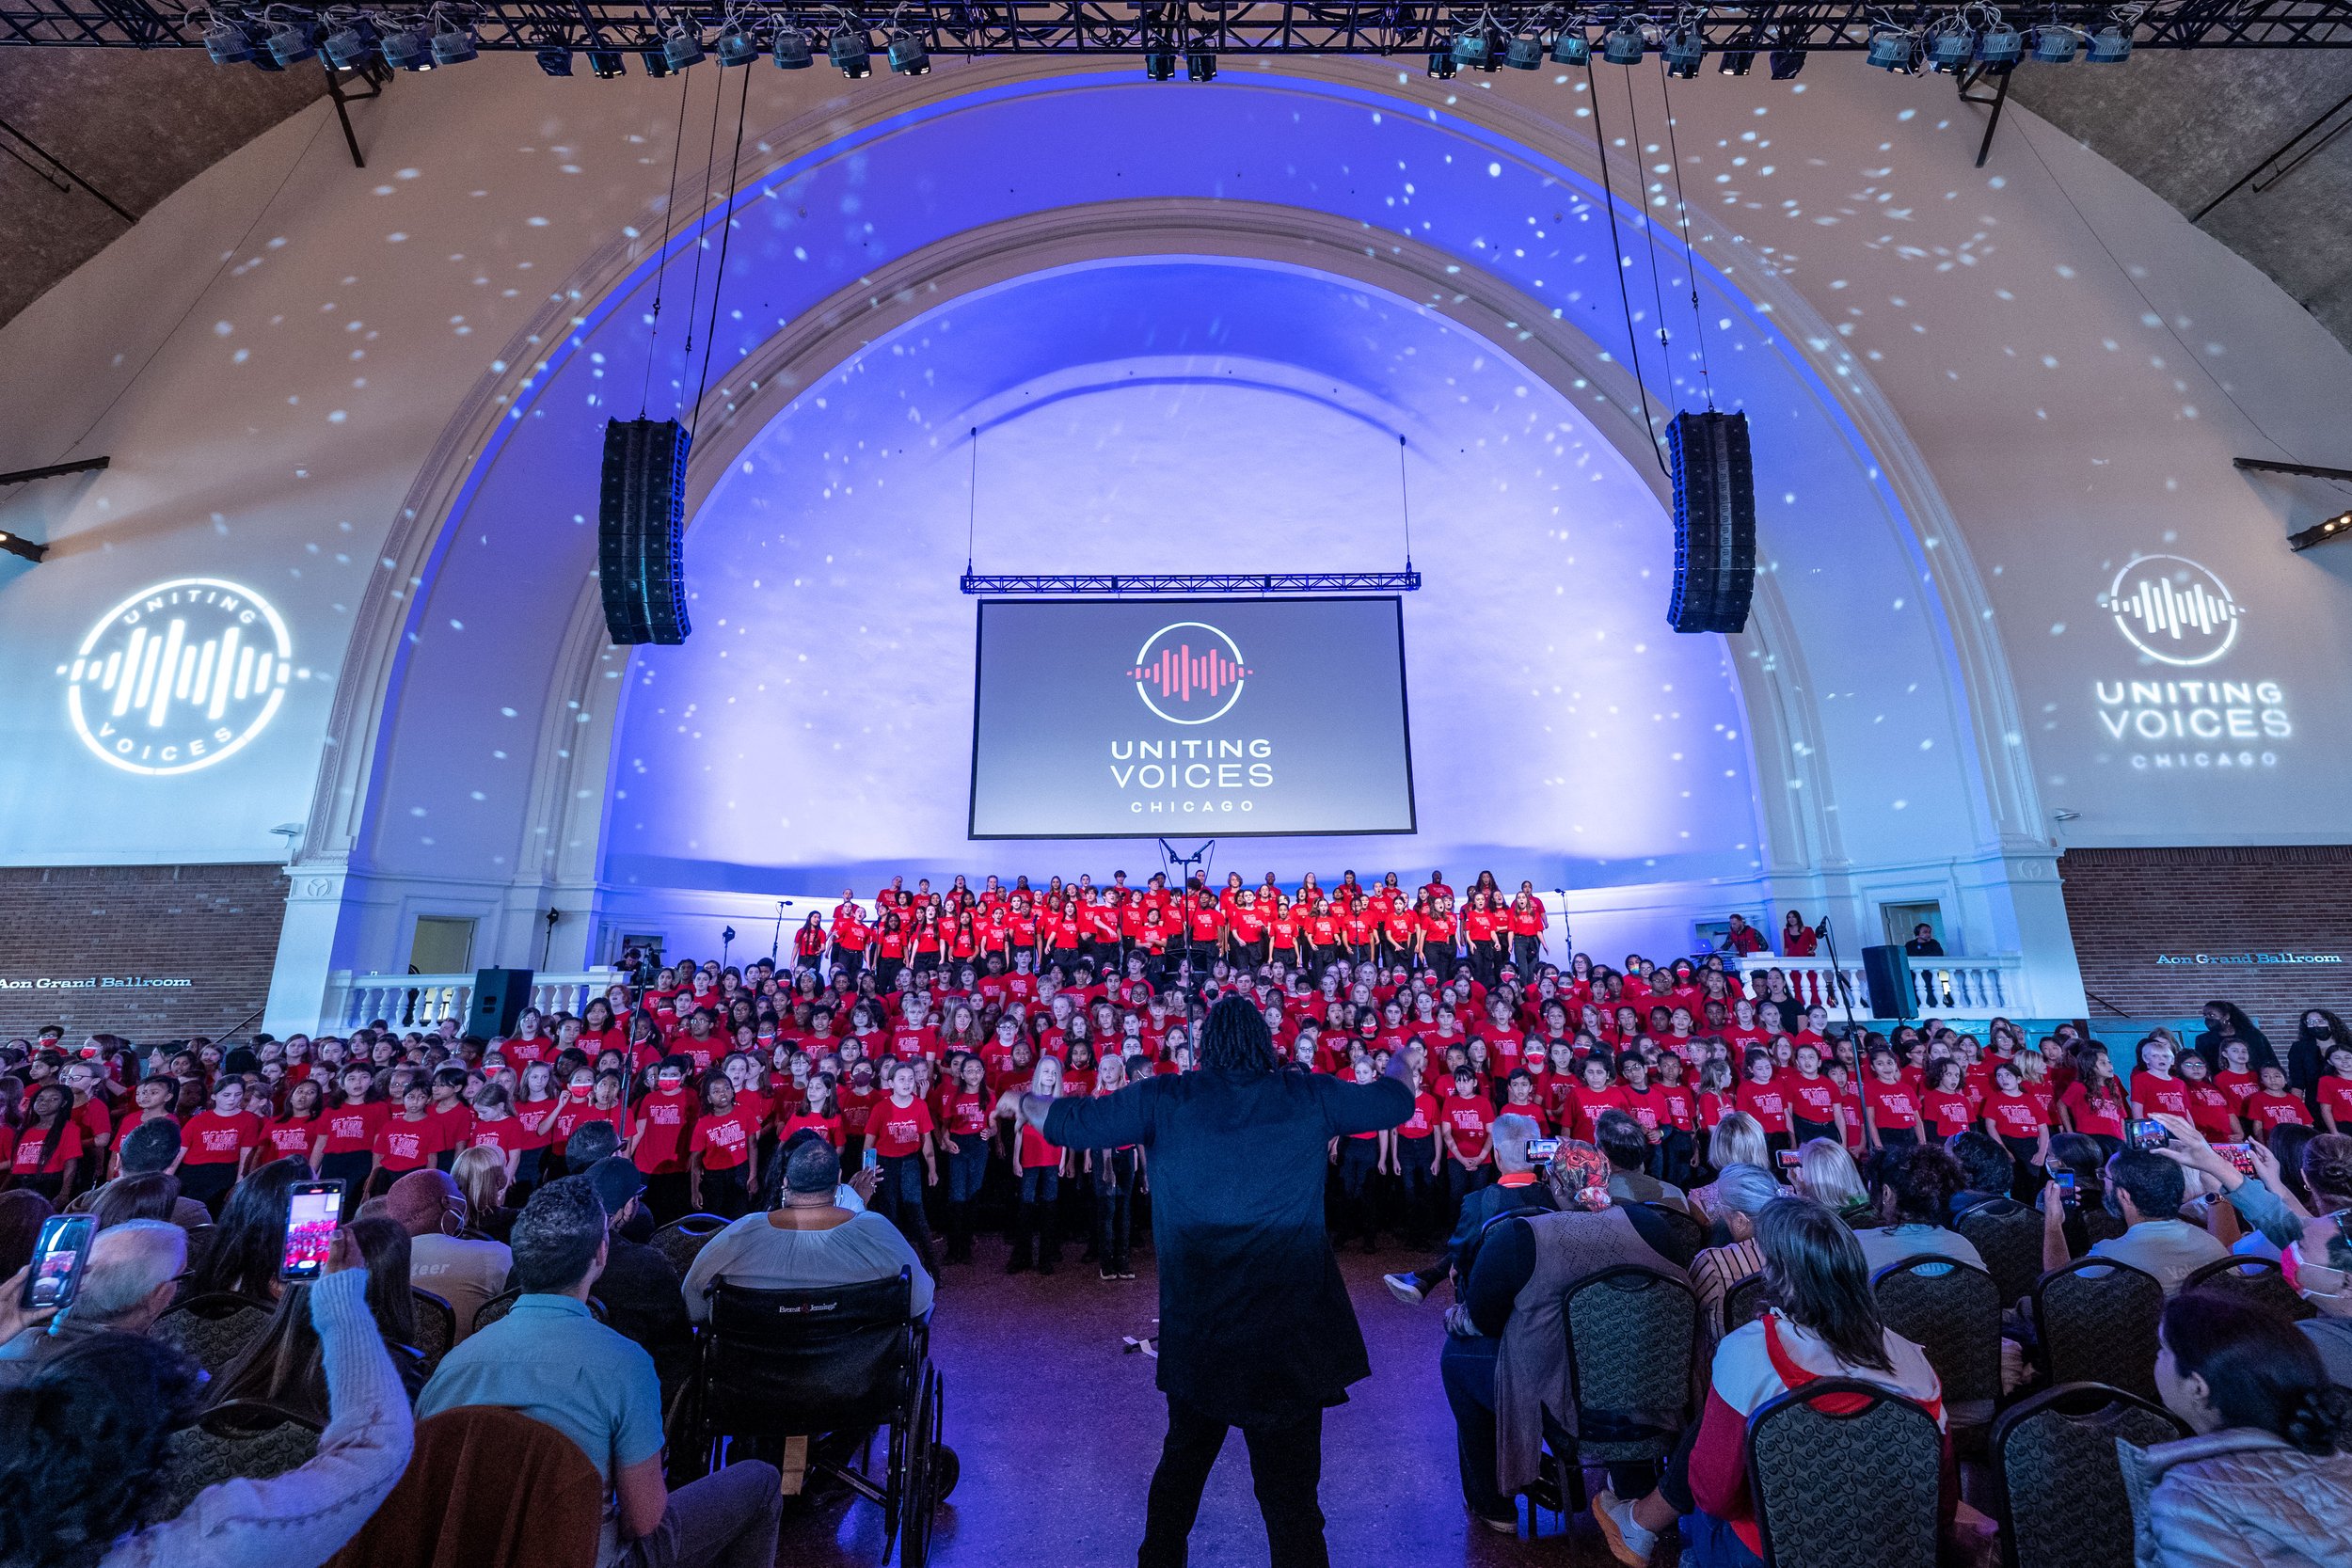  The Chicago Children’s Choir changes its name to Uniting Voices Chicago at Navy Pier.  